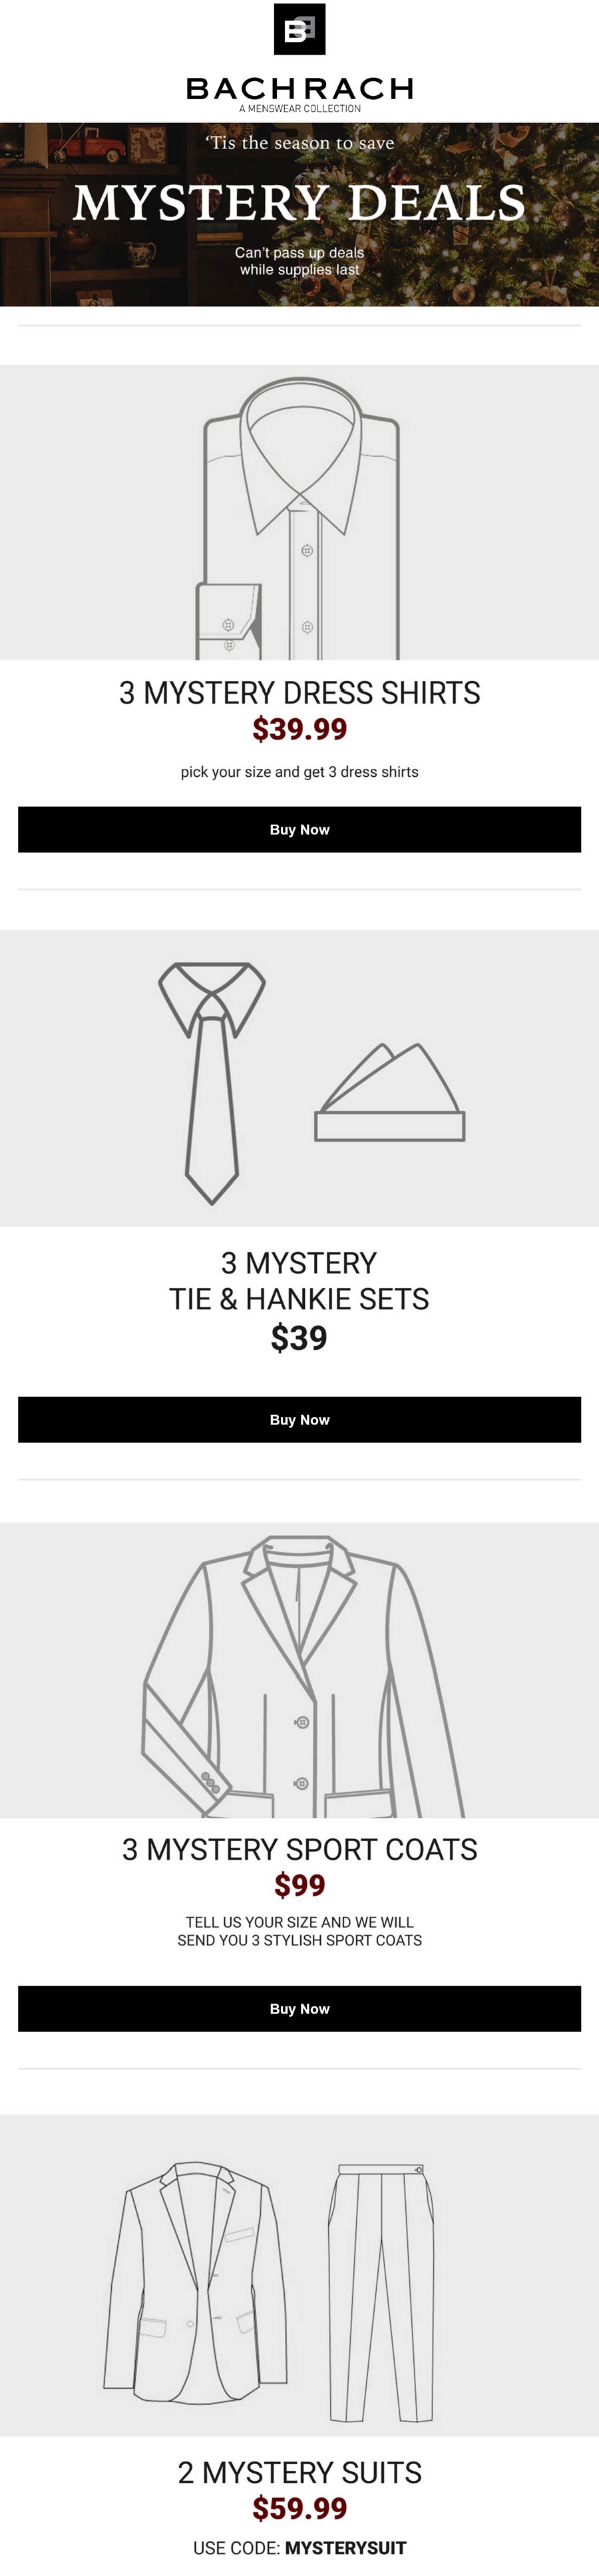 Bachrach stores Coupon  2 mystery suits $60 & more at Bachrach via promo code MYSTERYSUIT #bachrach 